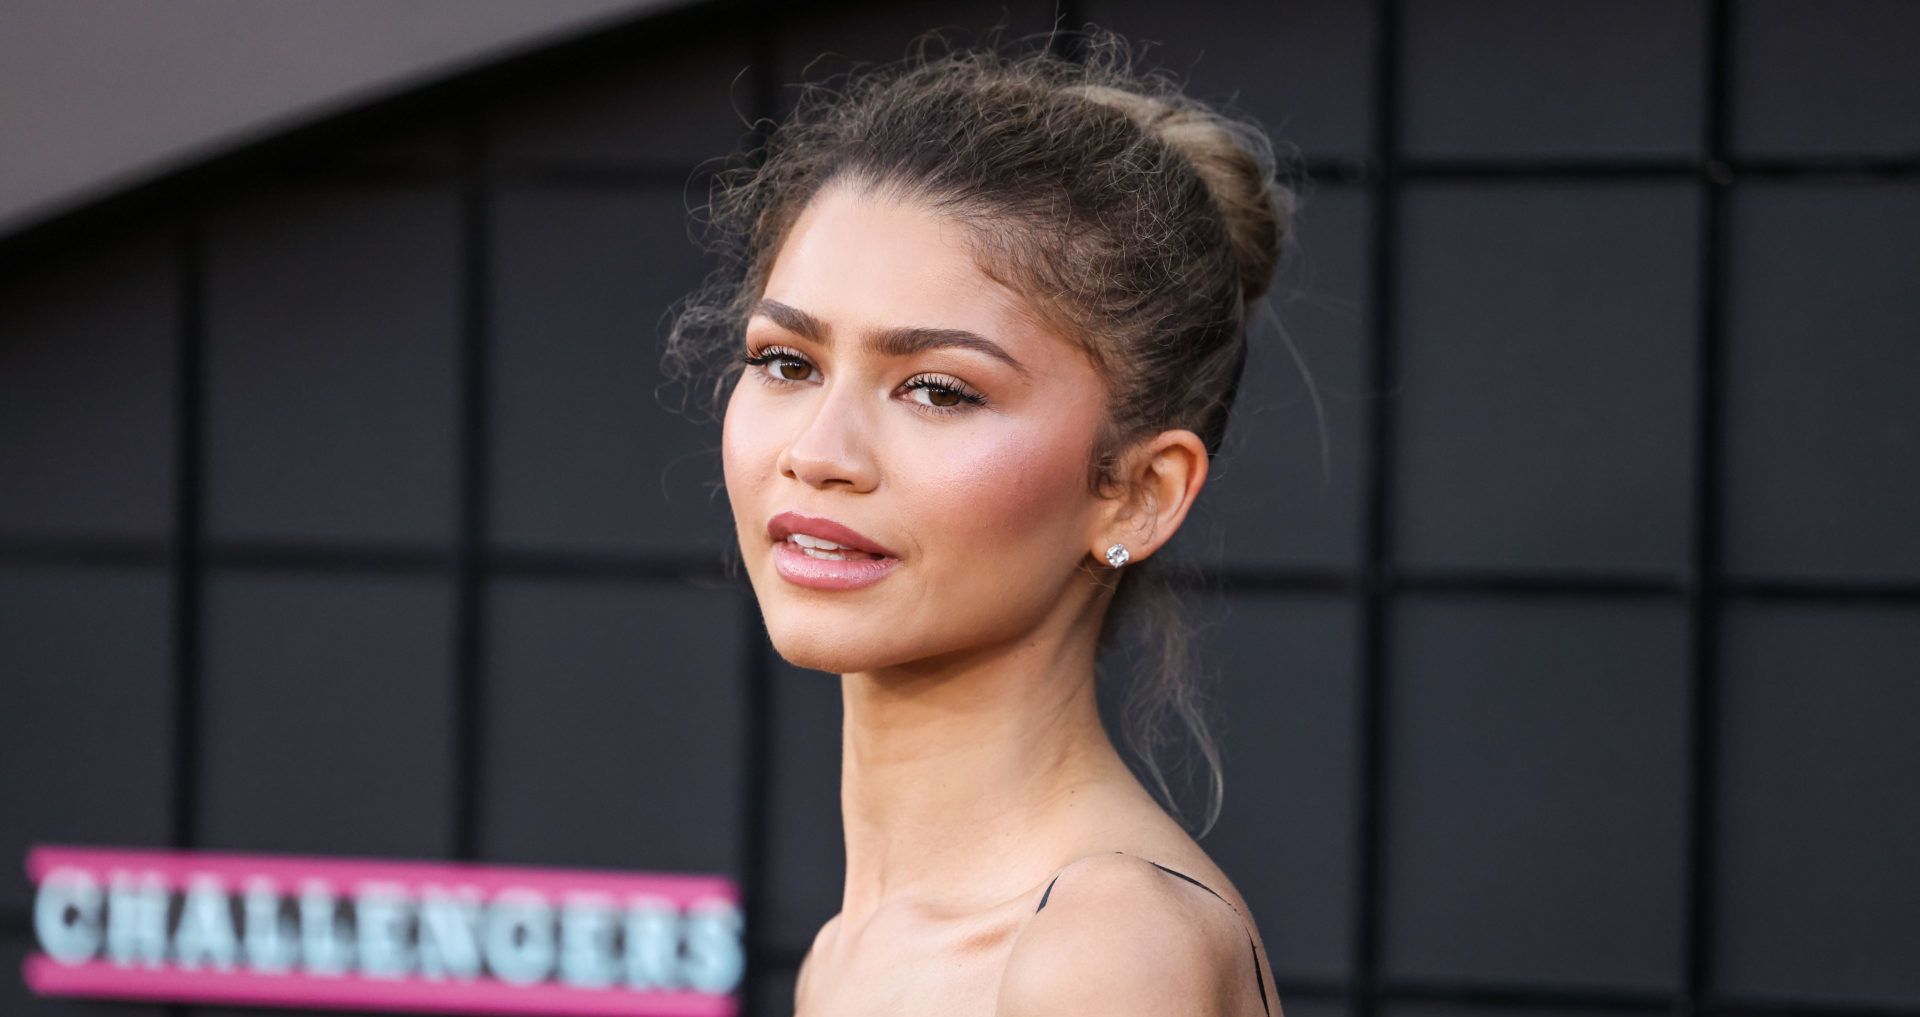 Zendaya must be the queen of calm! The MET Gala is happening this Monday and Zendaya's dress is still in the works.